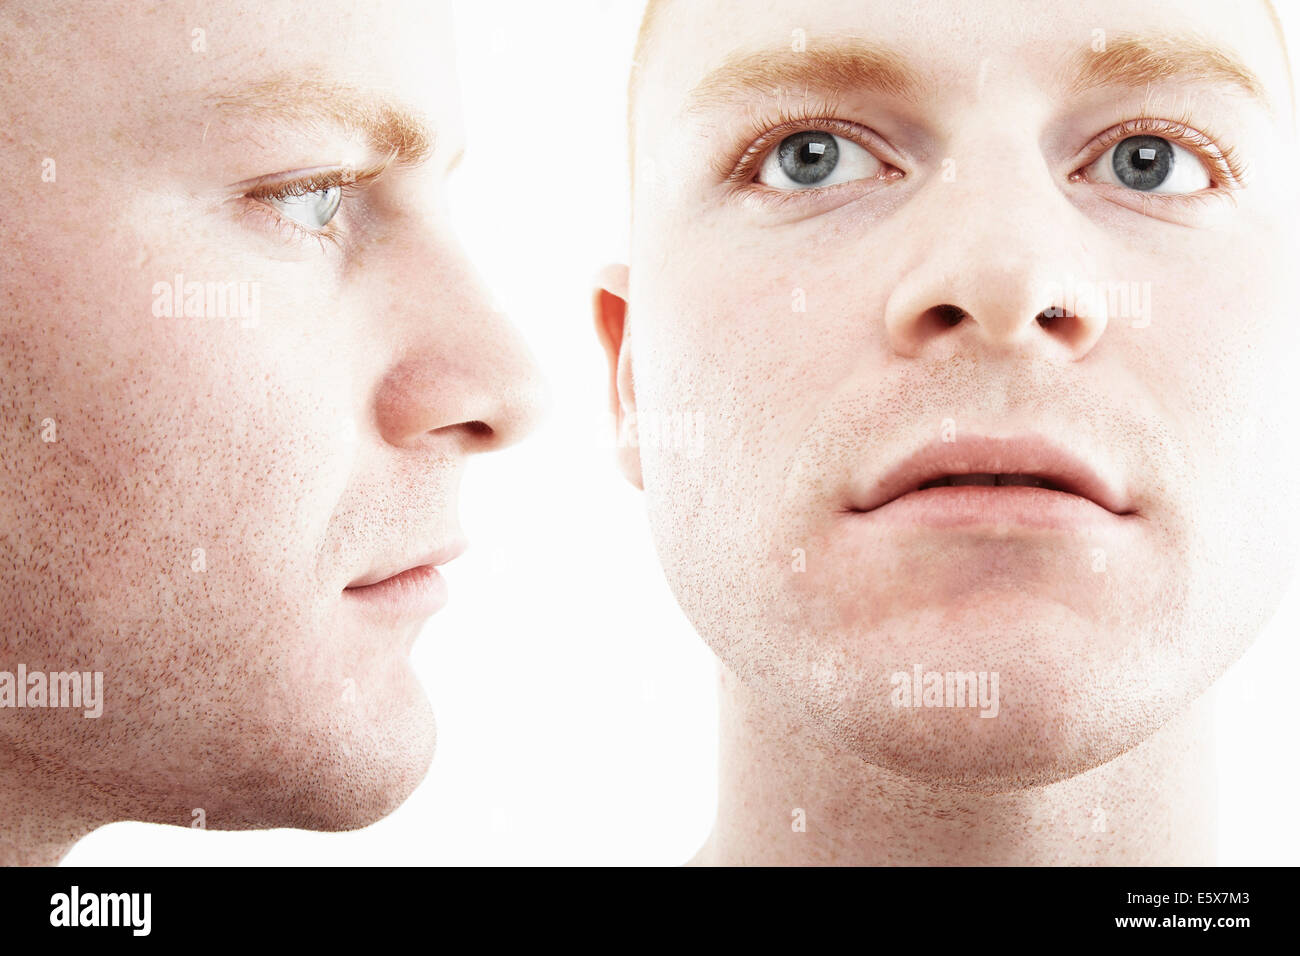 Two time multi exposure of face and profile of young man Stock Photo